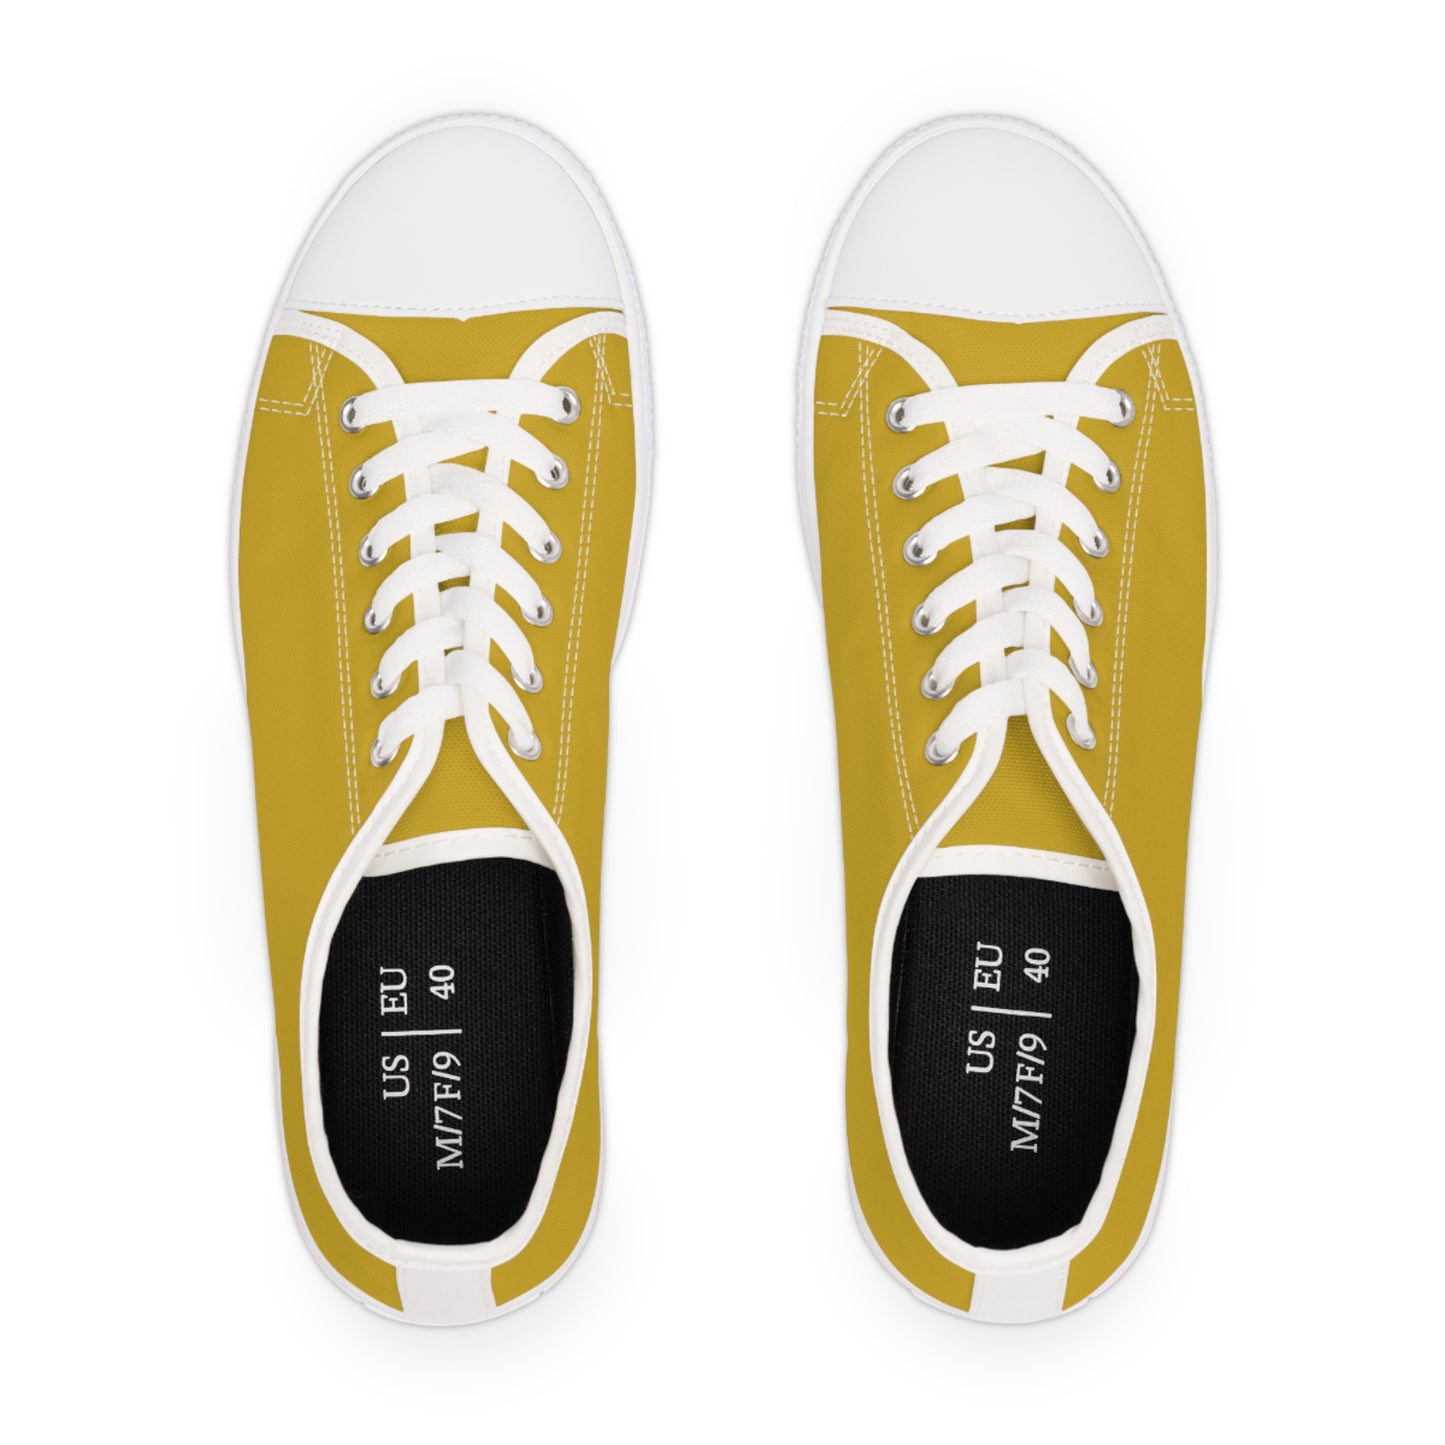 Women's Low Top Sneakers - Gold US 12 White sole